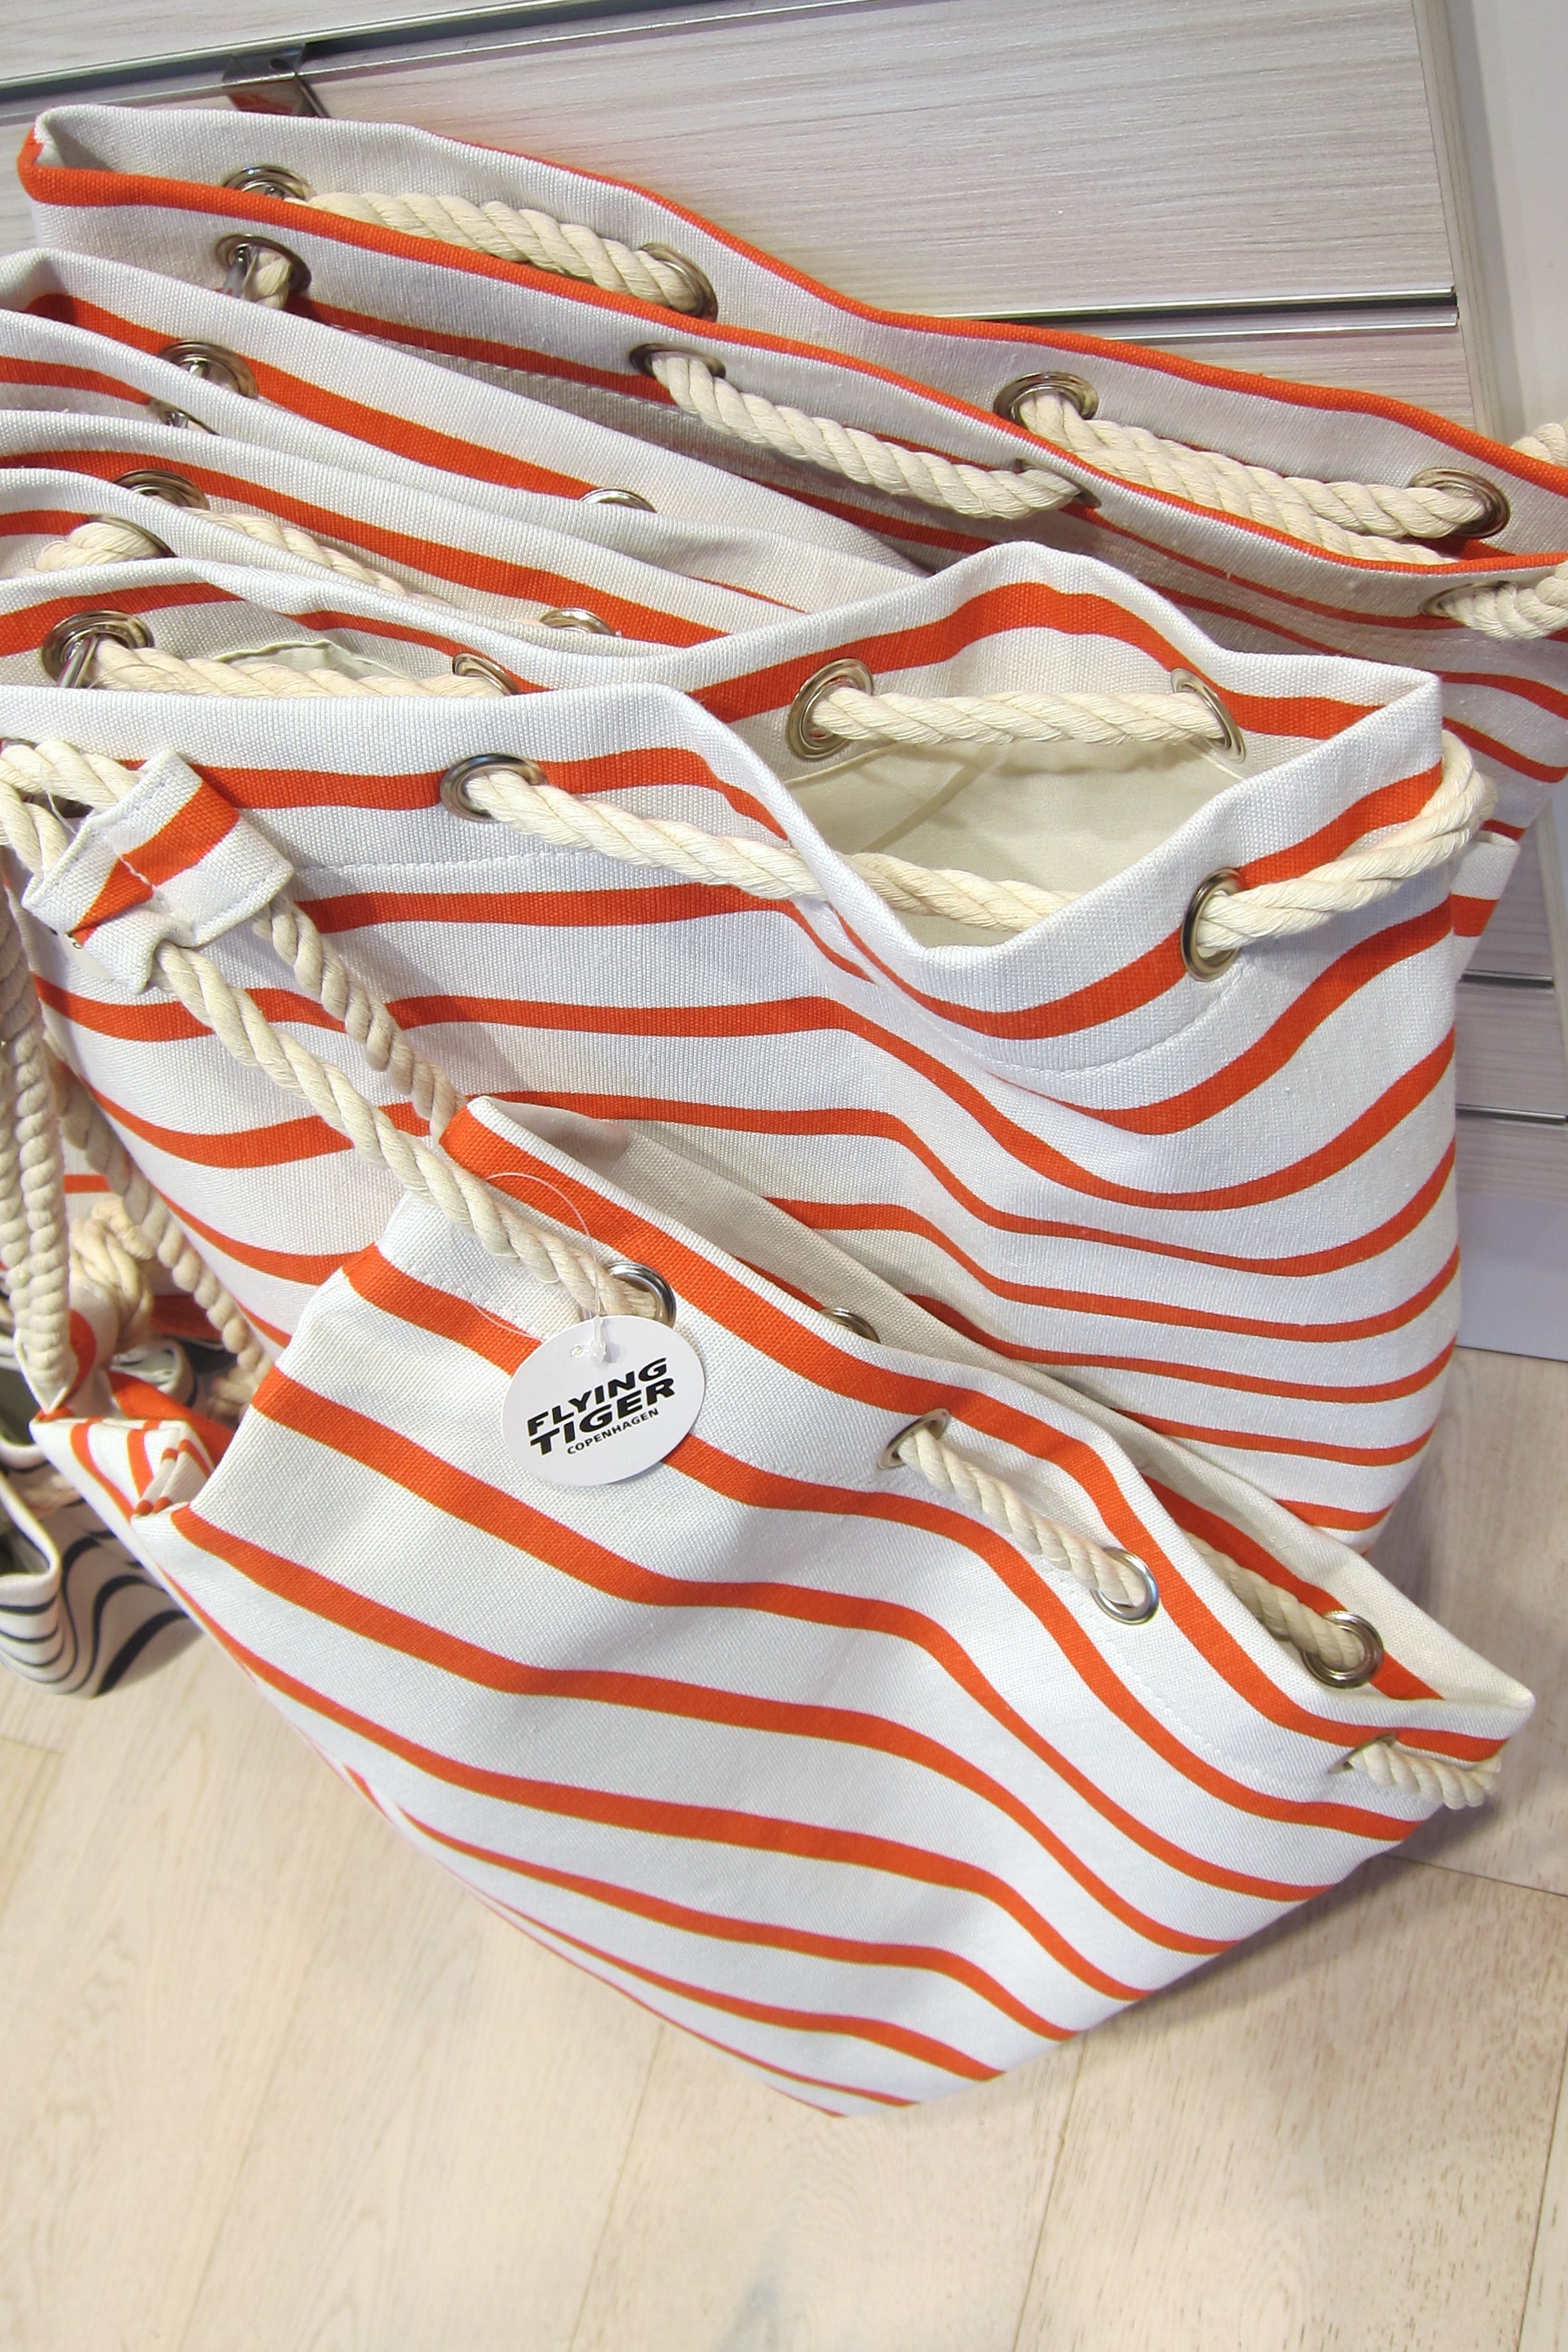 Flying Tiger Copenhagen - It's hard not to customise your tote bag